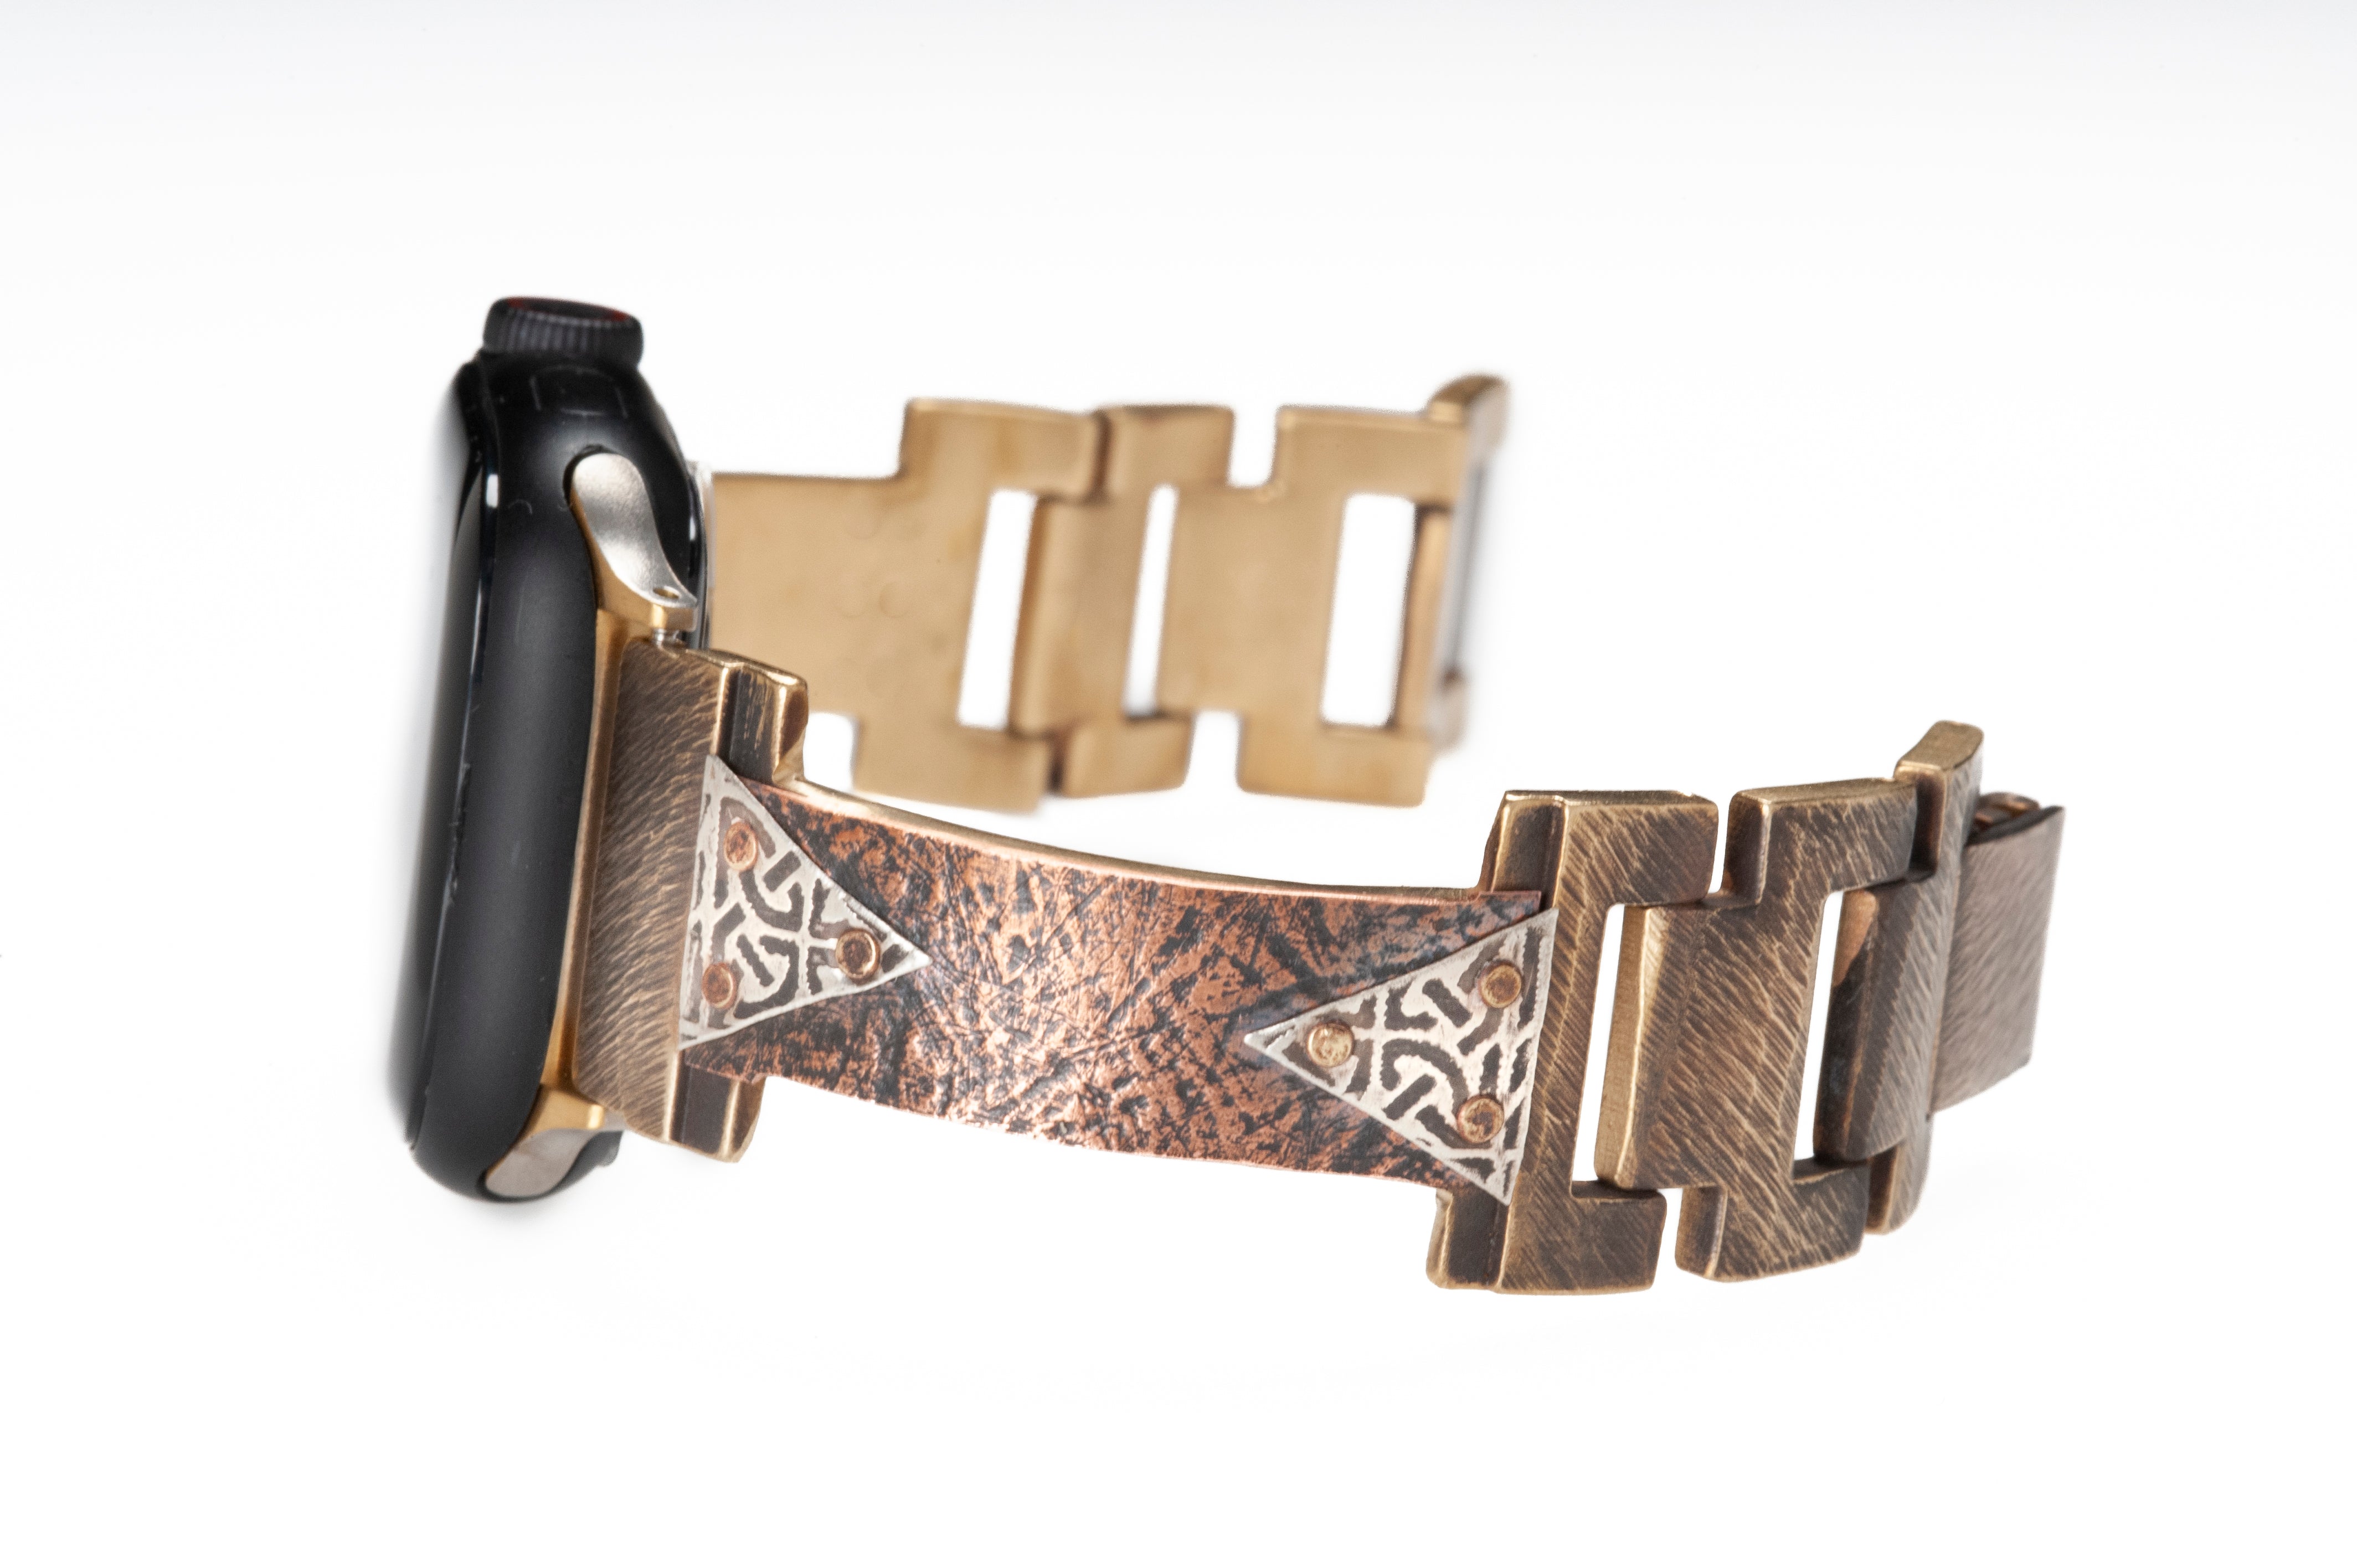 Ponte Vecchio Apple Watch Band in Copper and Silver - Narrow